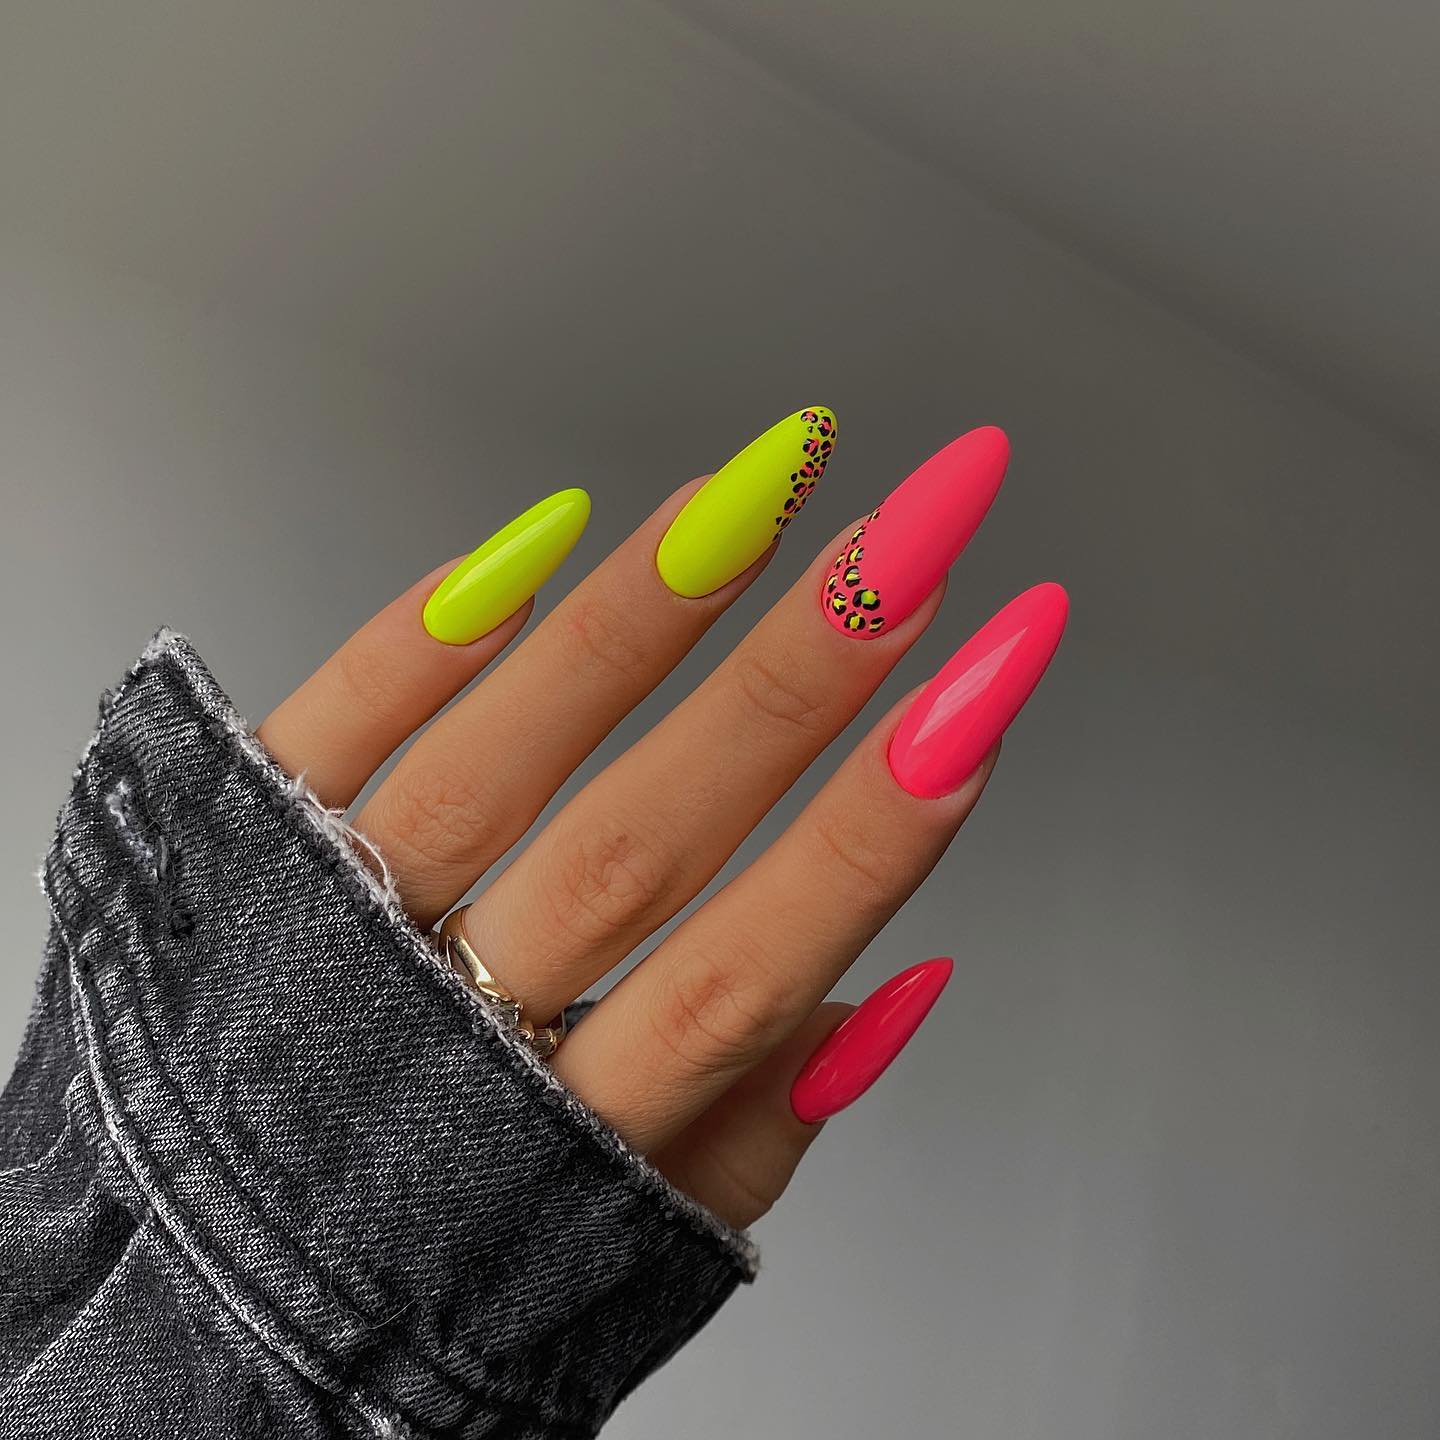 Buy KLEANCOLOR NEON COLORS 12 FULL COLLETION SET NAIL POLISH LACQUER + FREE  EARRING by Kleancolor Online at Low Prices in India - Amazon.in